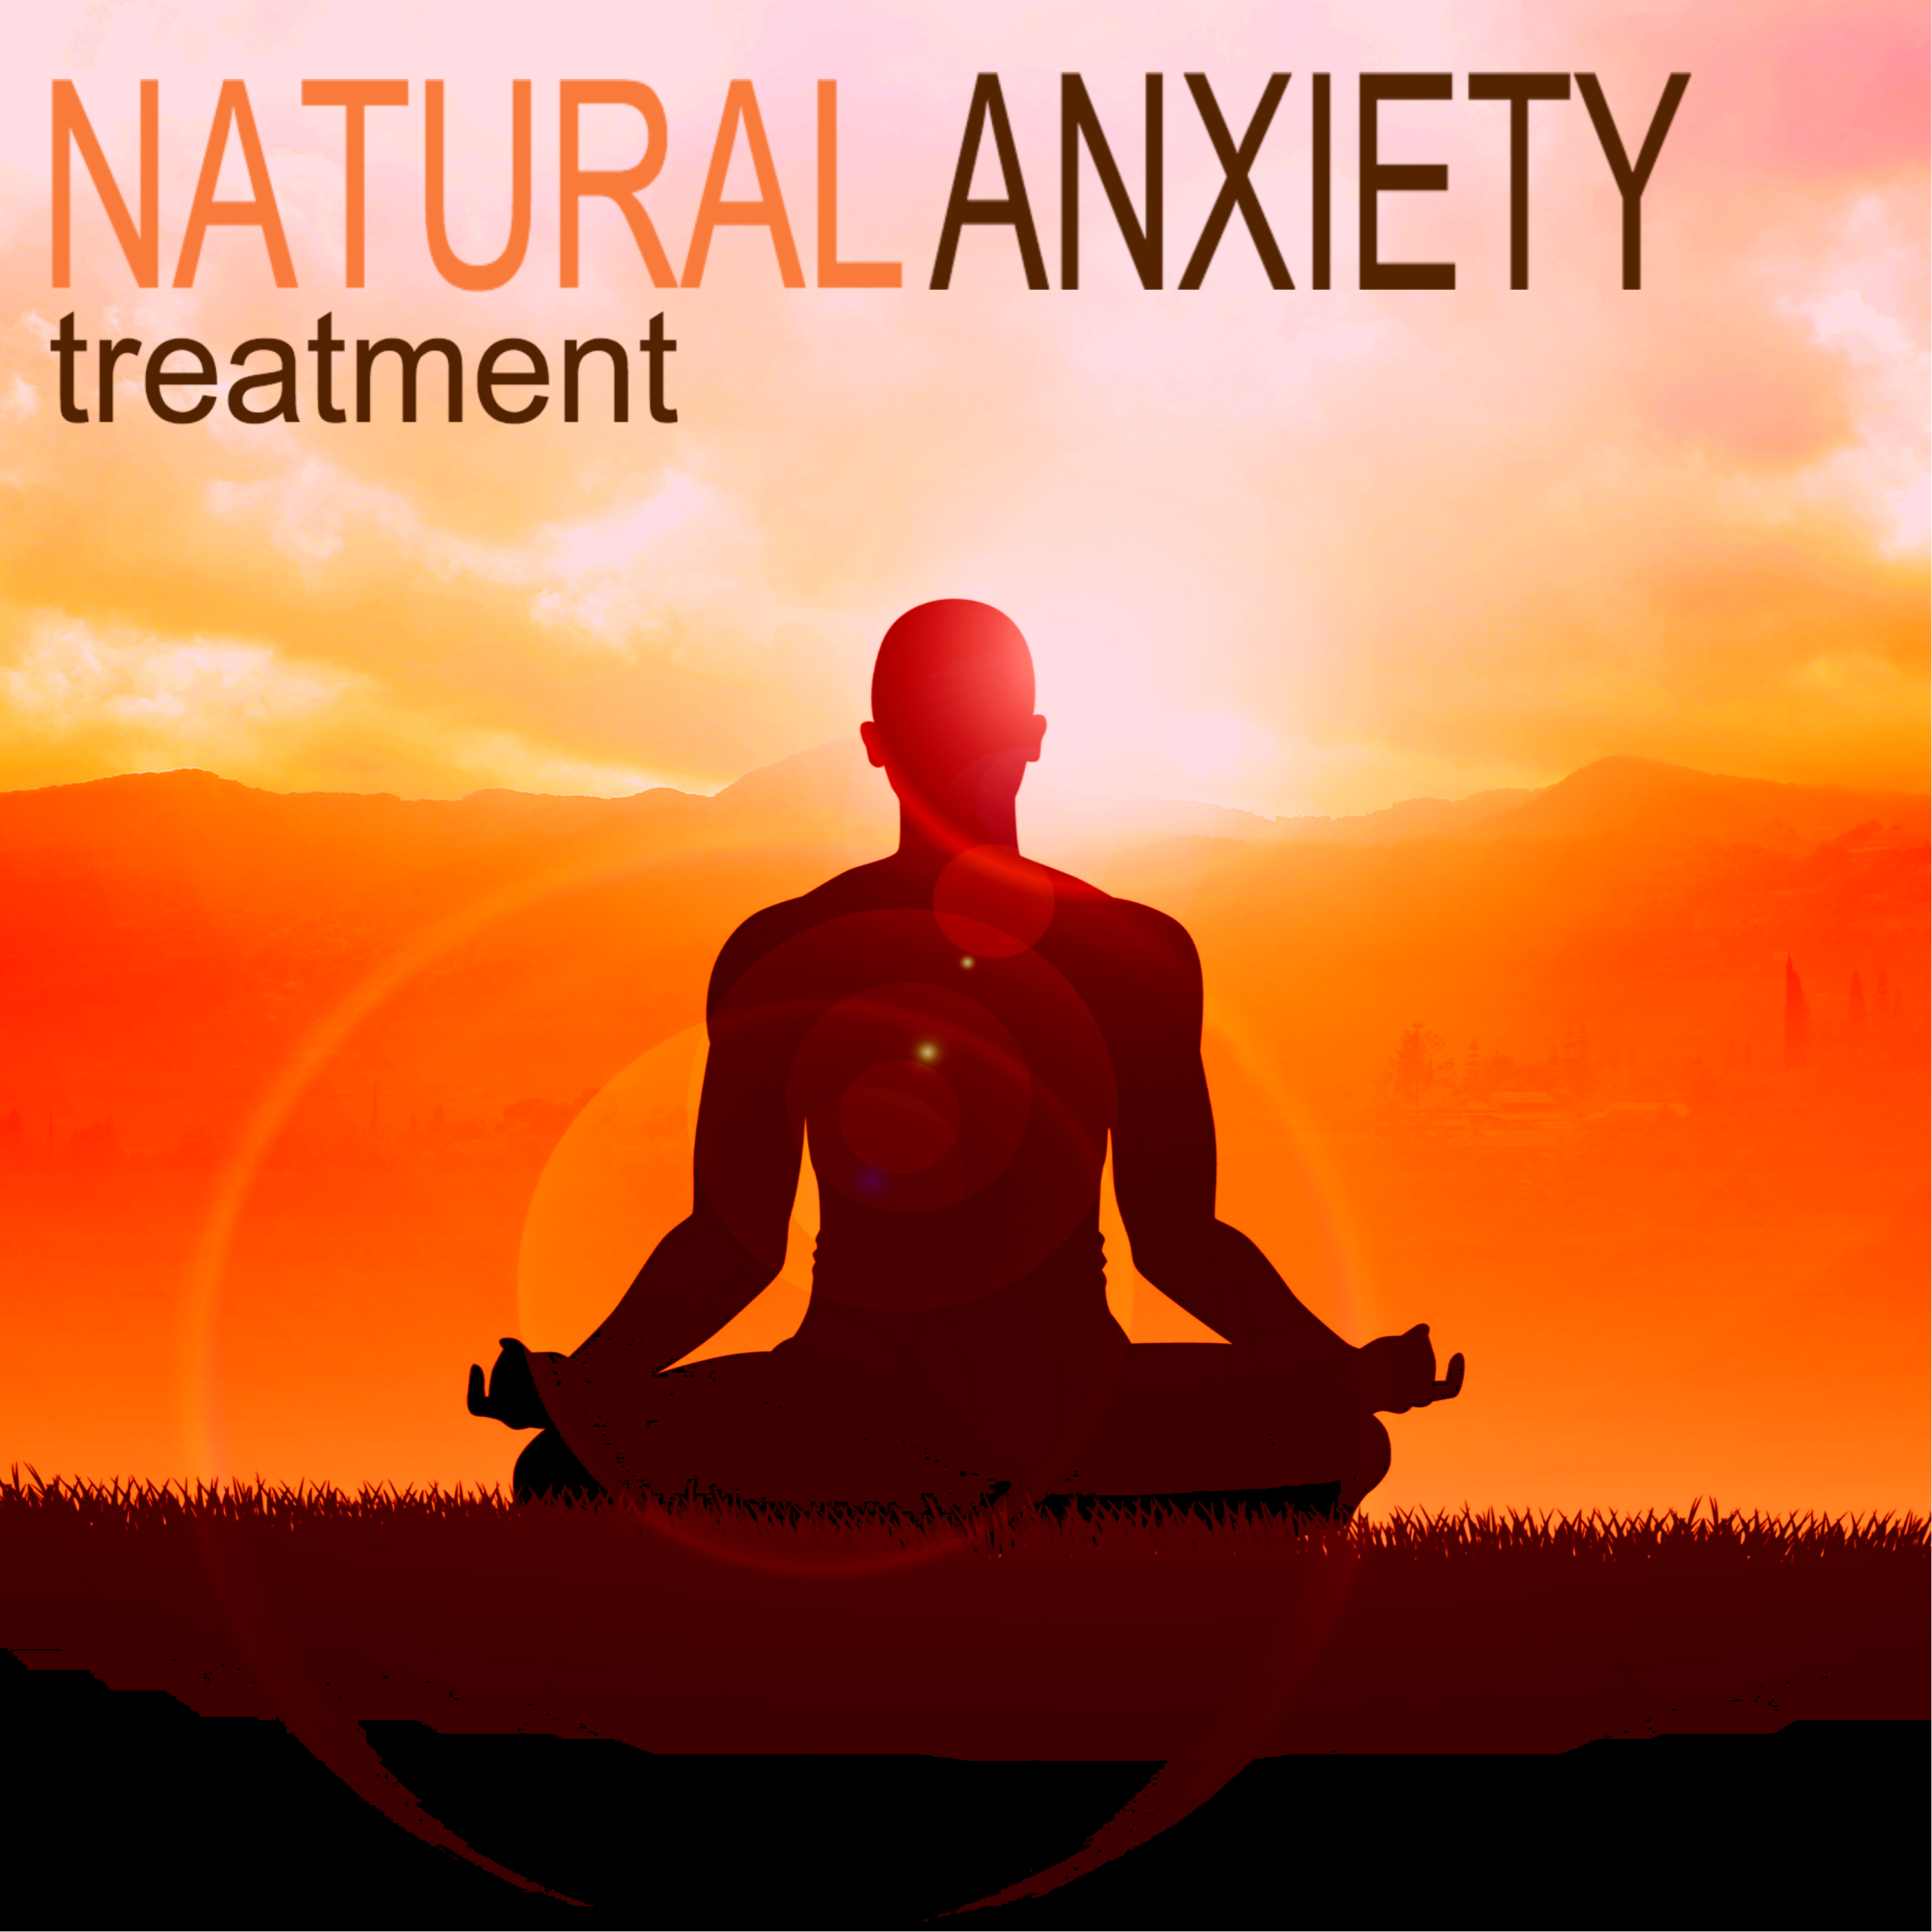 Natural Anxiety Treatment - Soothing Music for Yoga Experience, Spiritual Connection Songs